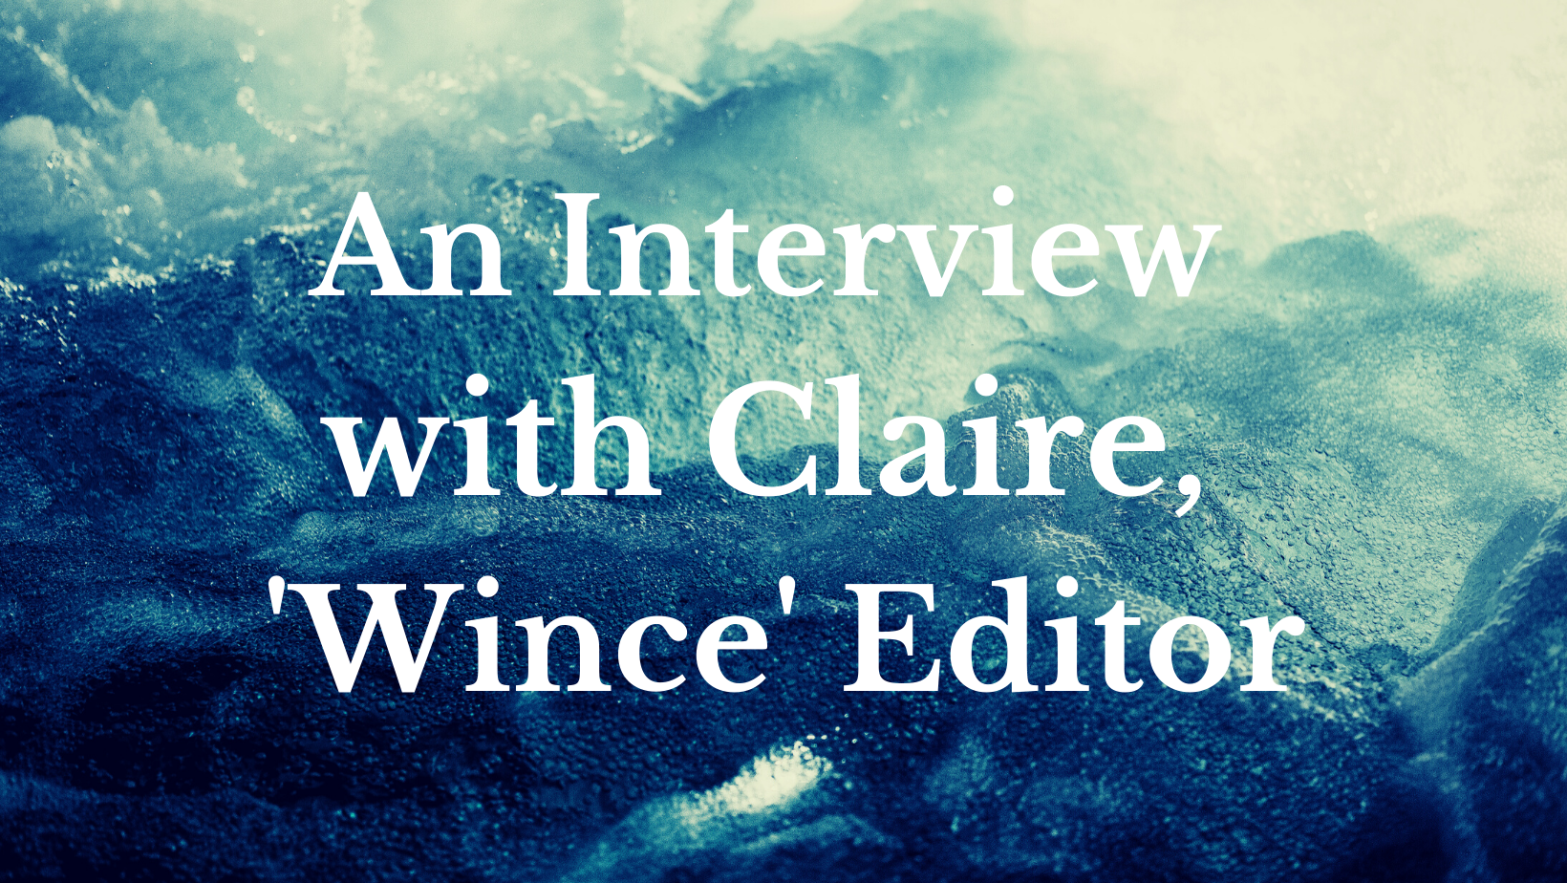 White text on a blue and white background, reading "An Interview with Claire, 'Wince' Editor'.